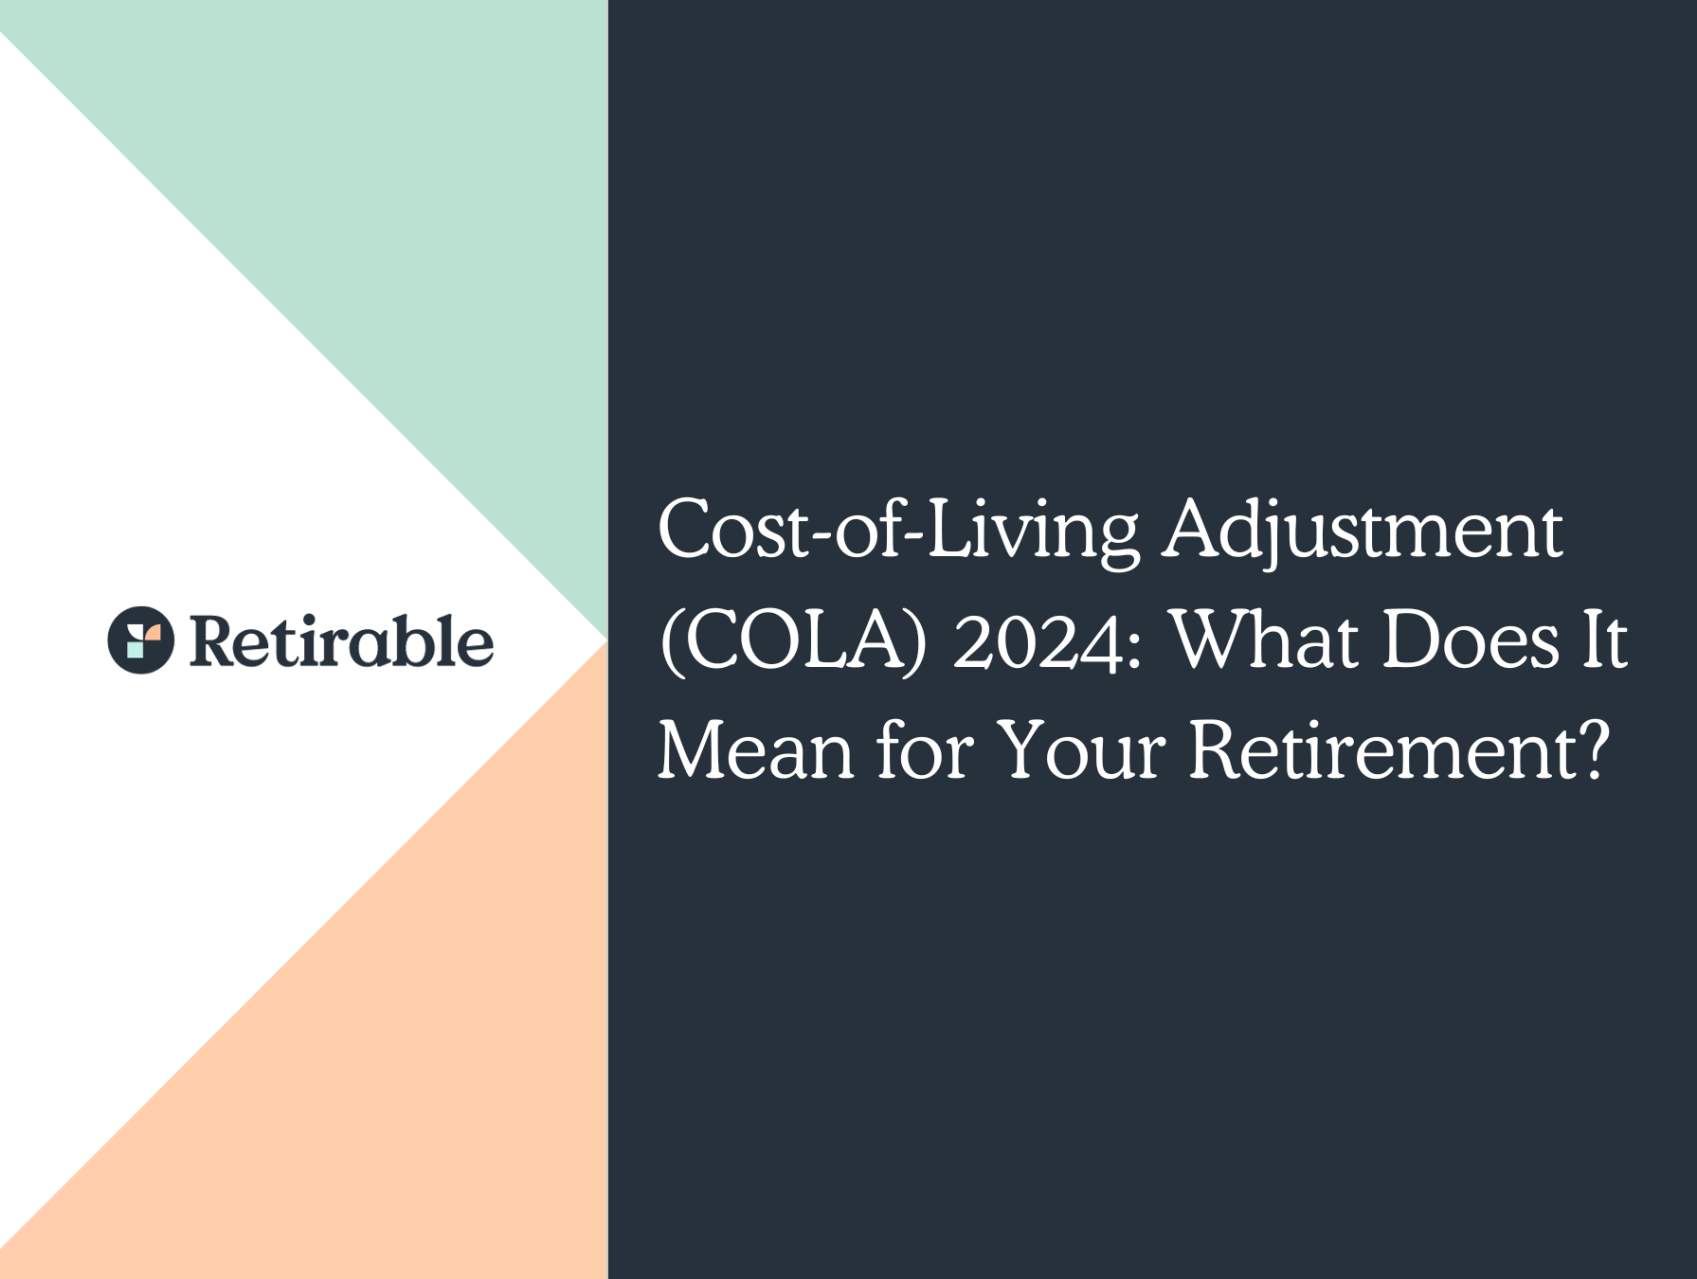 What Is a Cost-of-Living Adjustment (COLA), and How Does It Work?